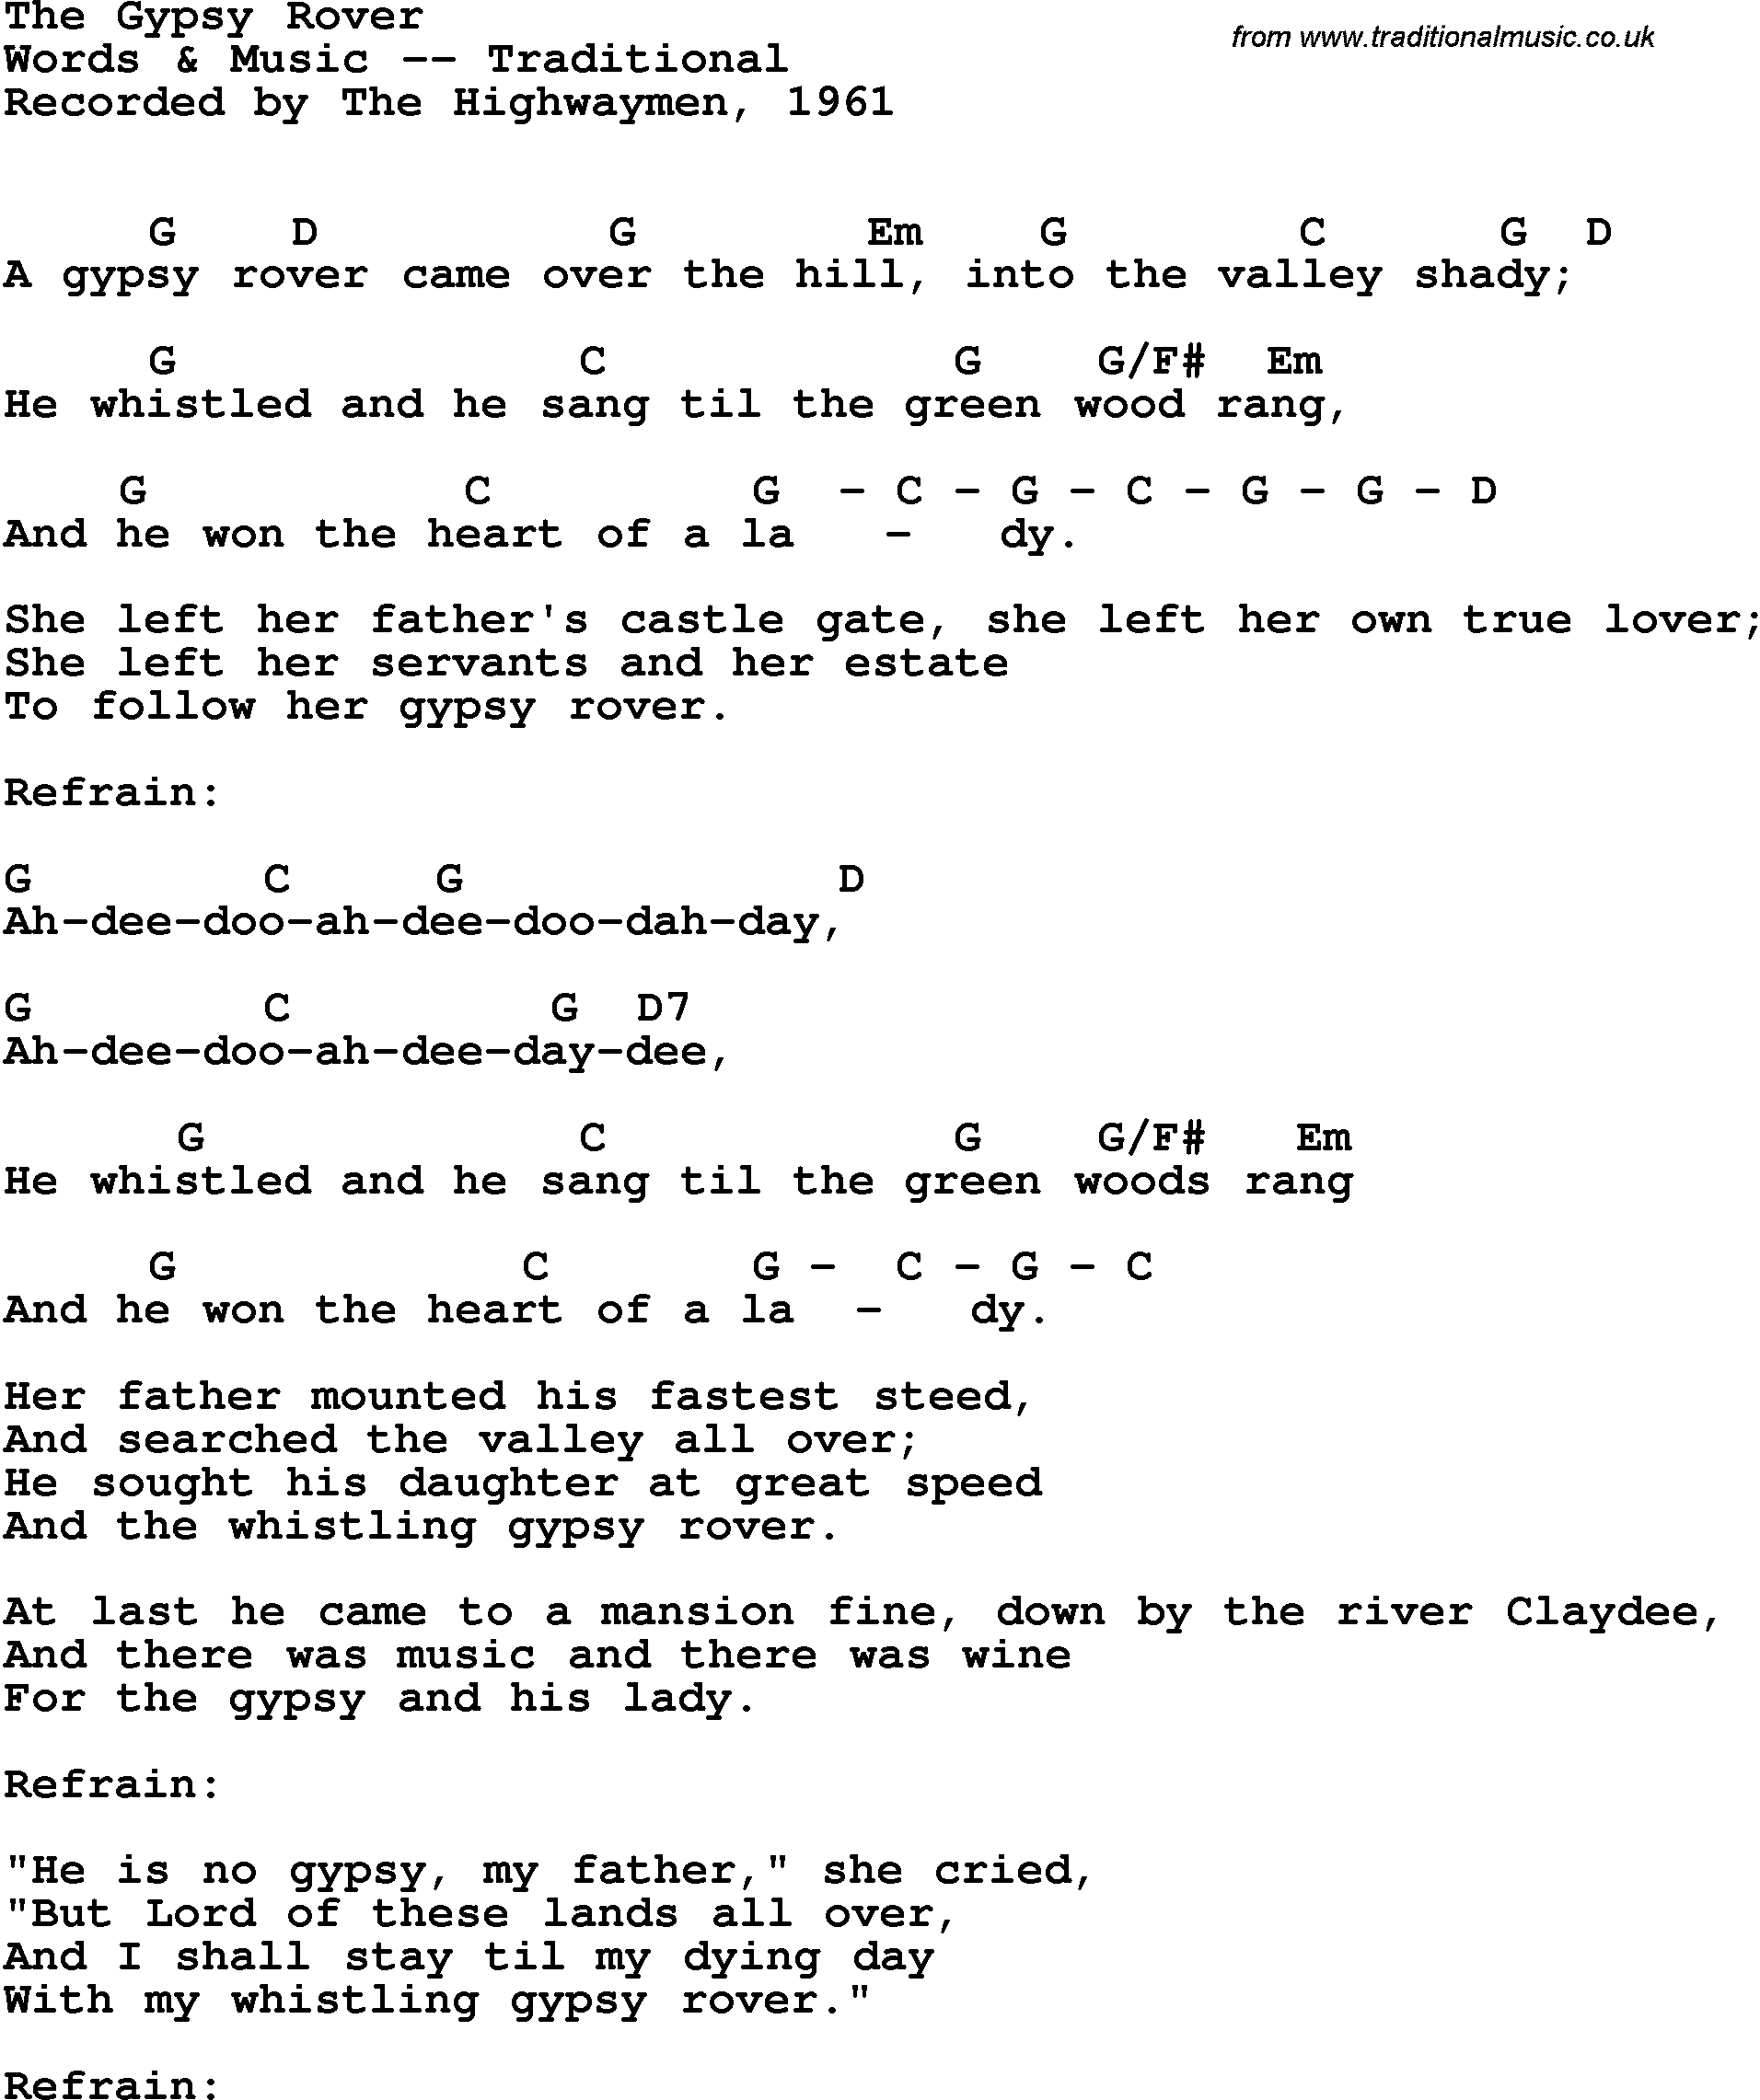 Song Lyrics with guitar chords for Gypsy Rover, The - The Highwaymen, 1961